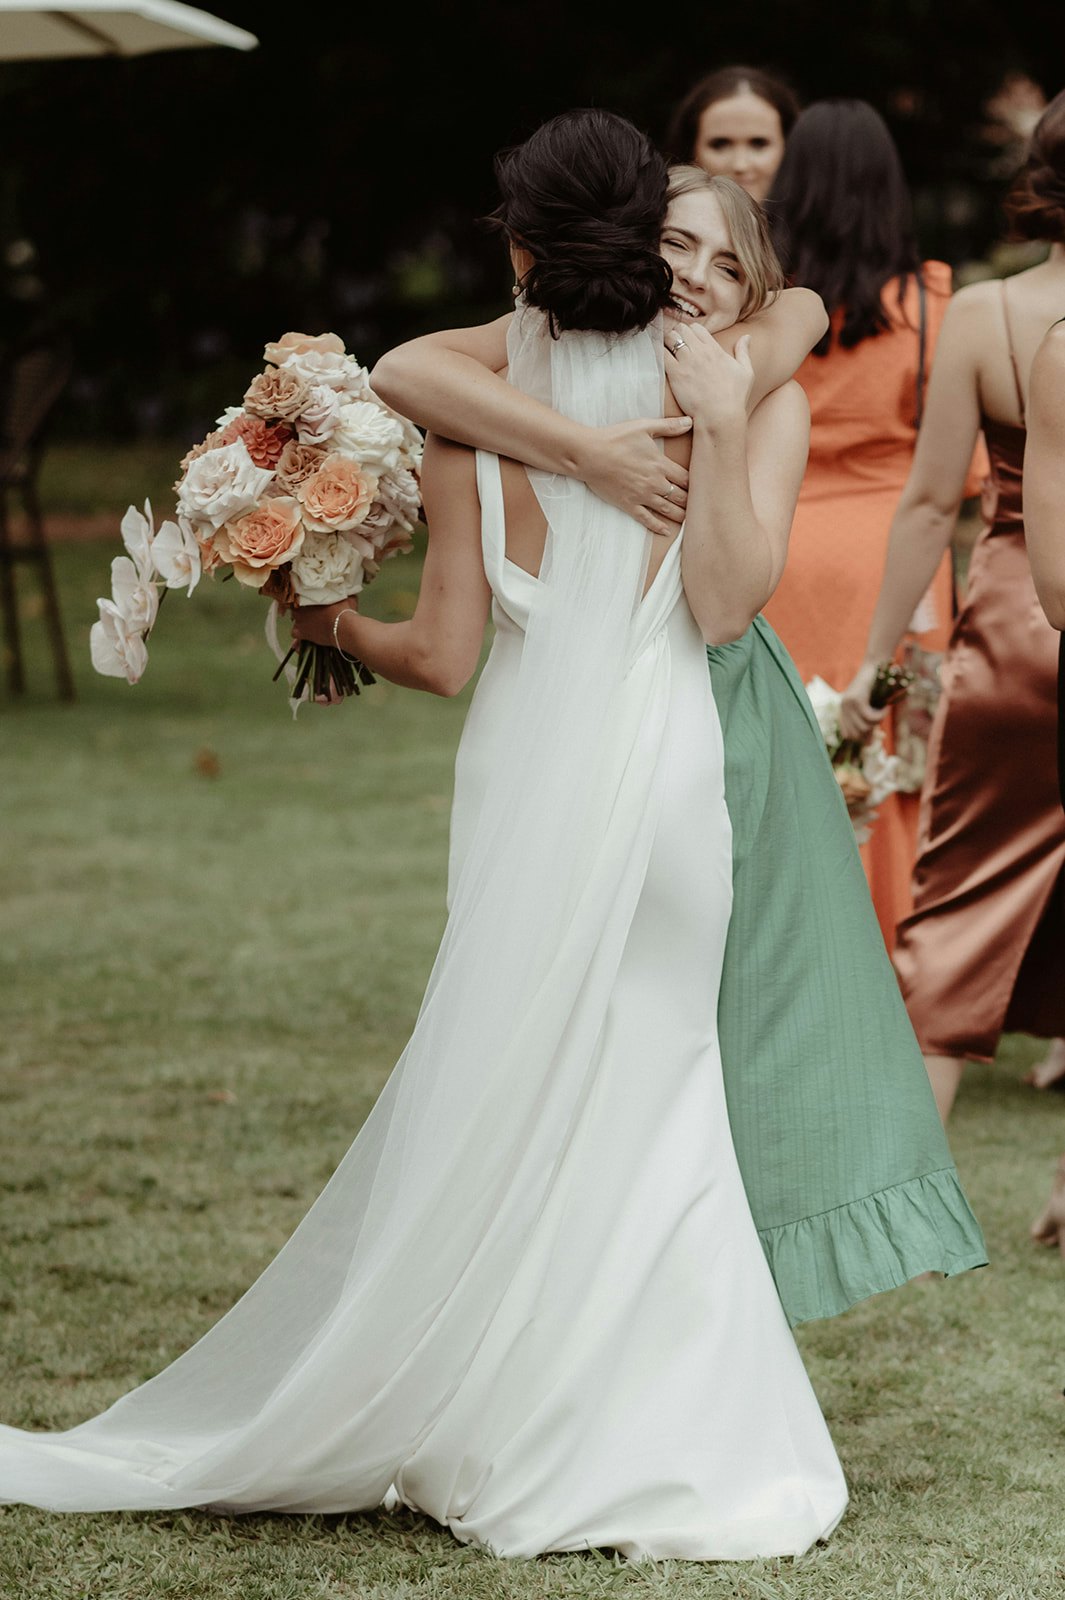 Bride and friend hugging